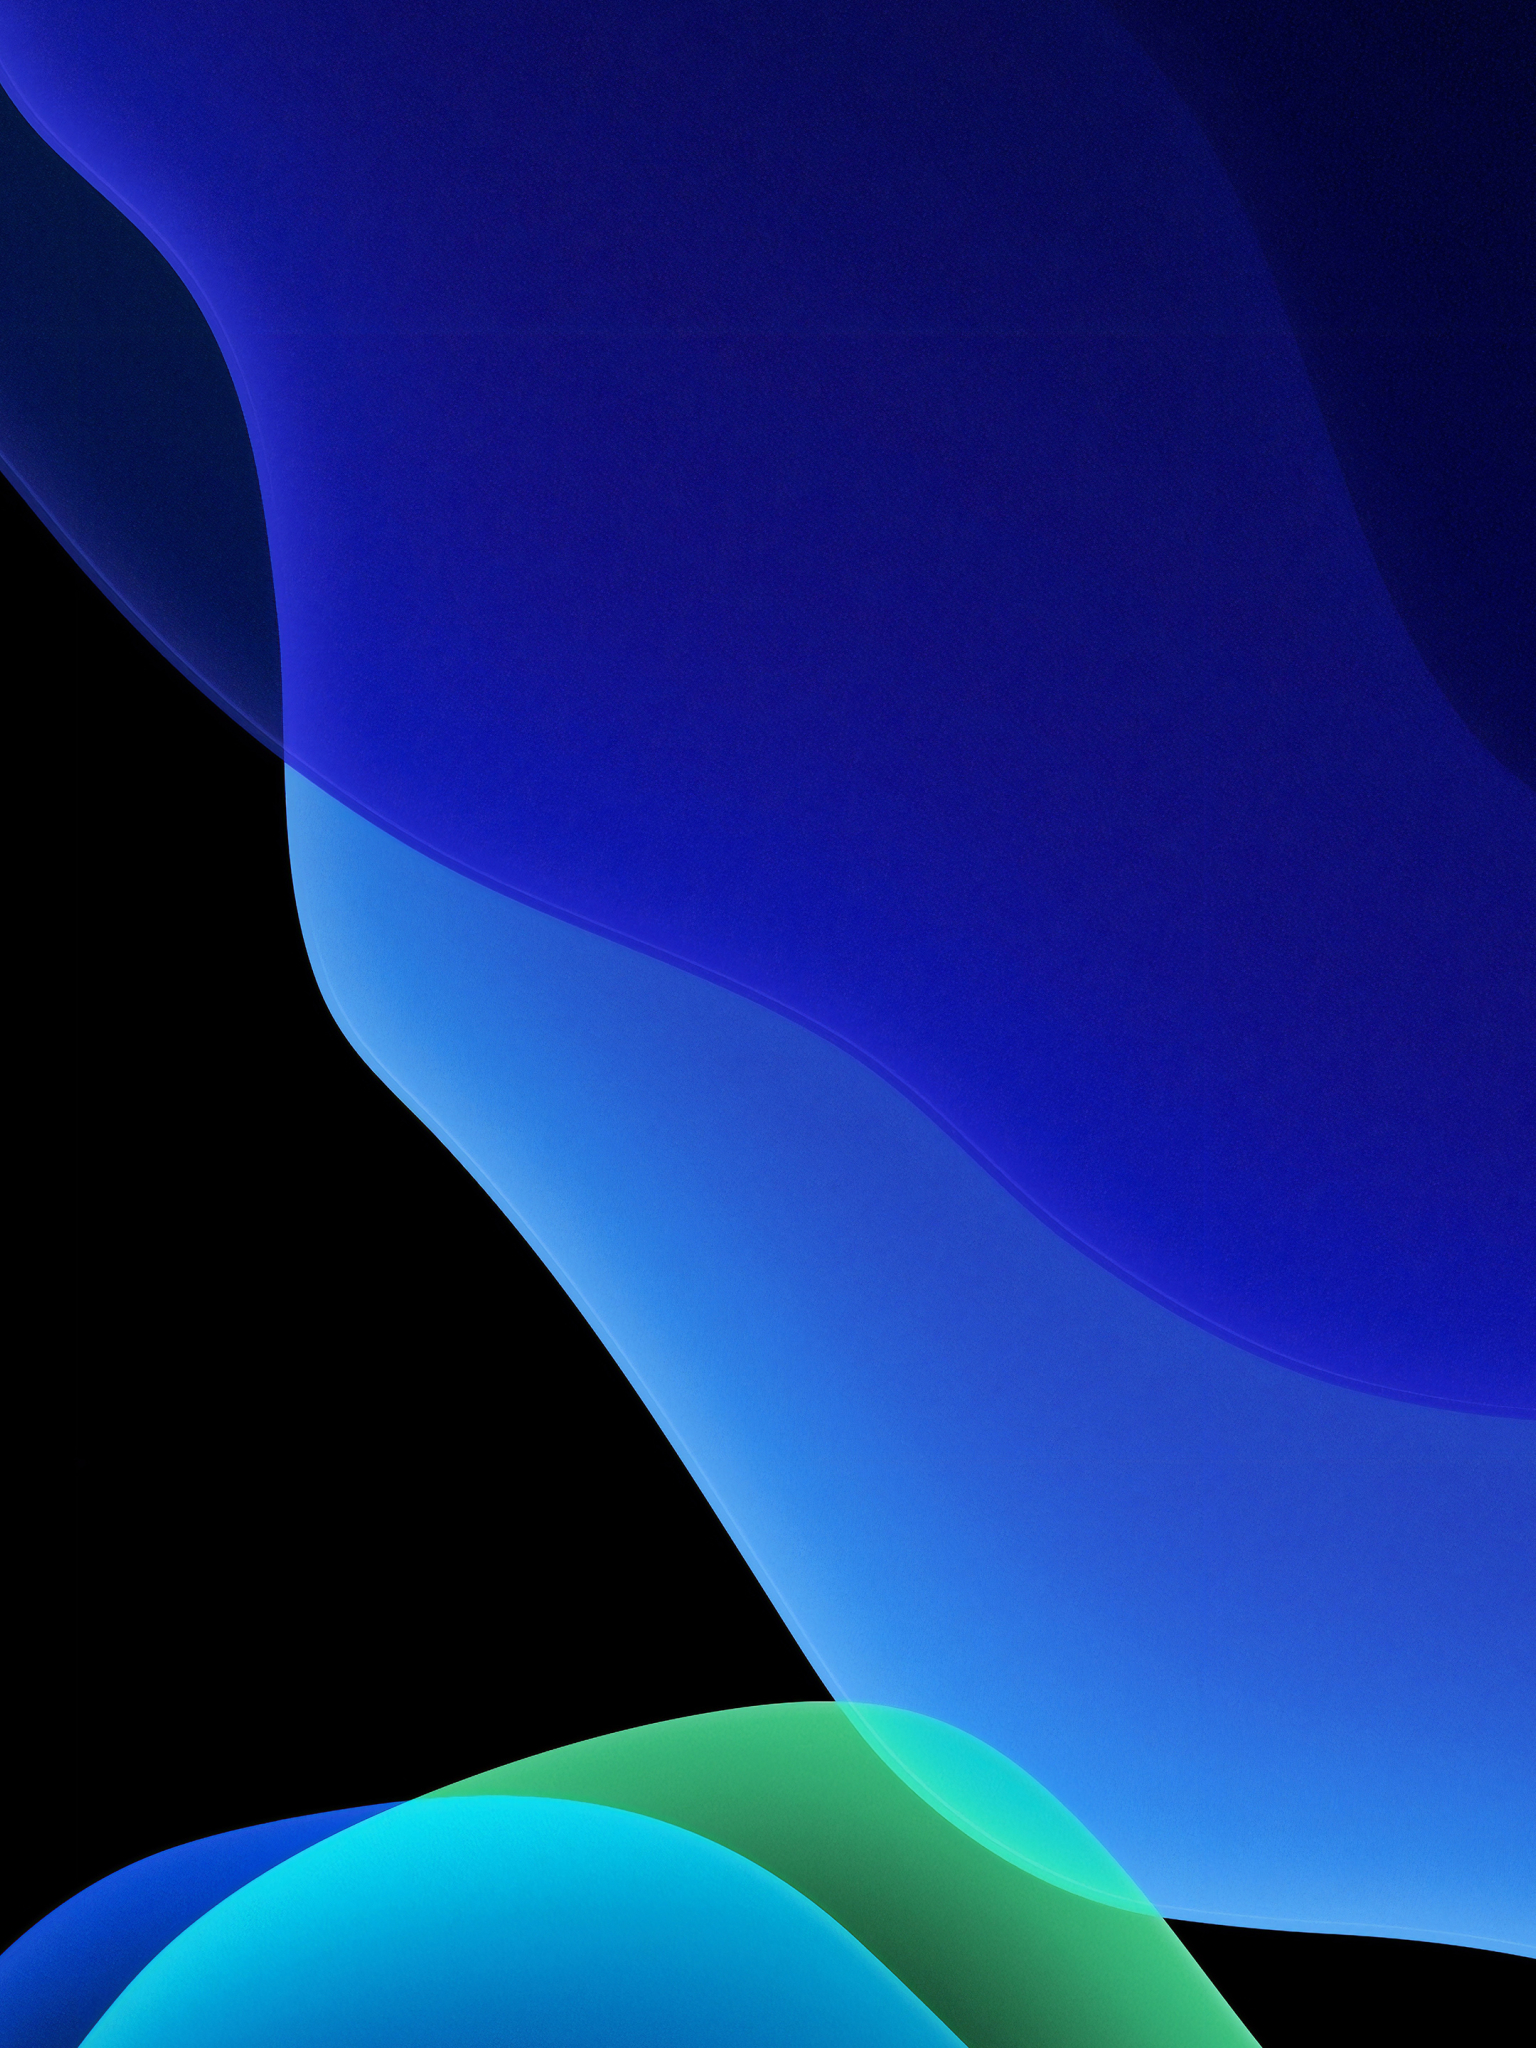 1536x48 Dark Blue Ios 13 Apple 1536x48 Resolution Wallpaper Hd Abstract 4k Wallpapers Images Photos And Background